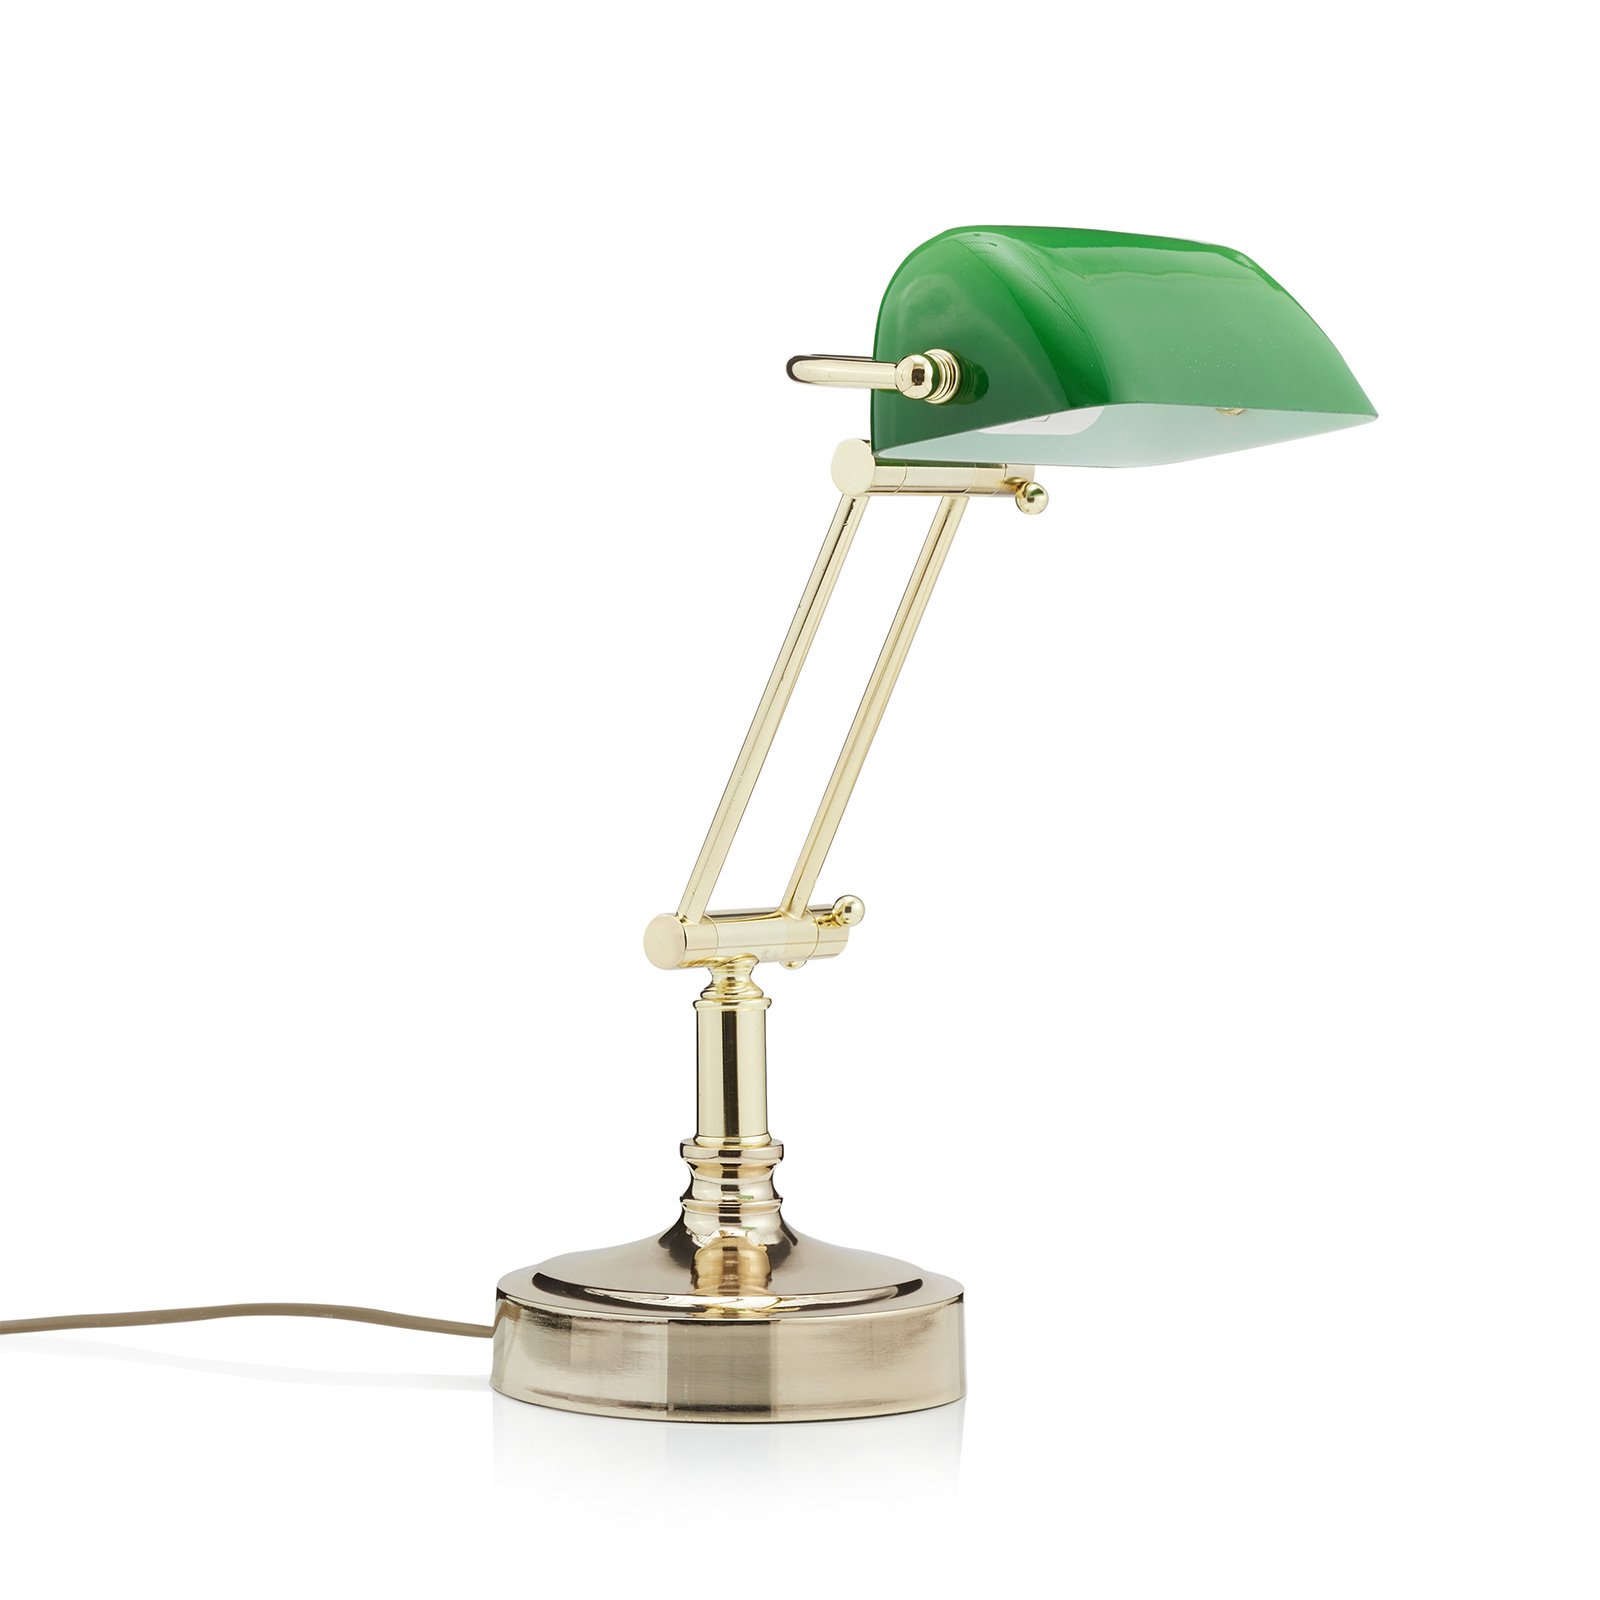 Steve banker's lamp with green glass shade